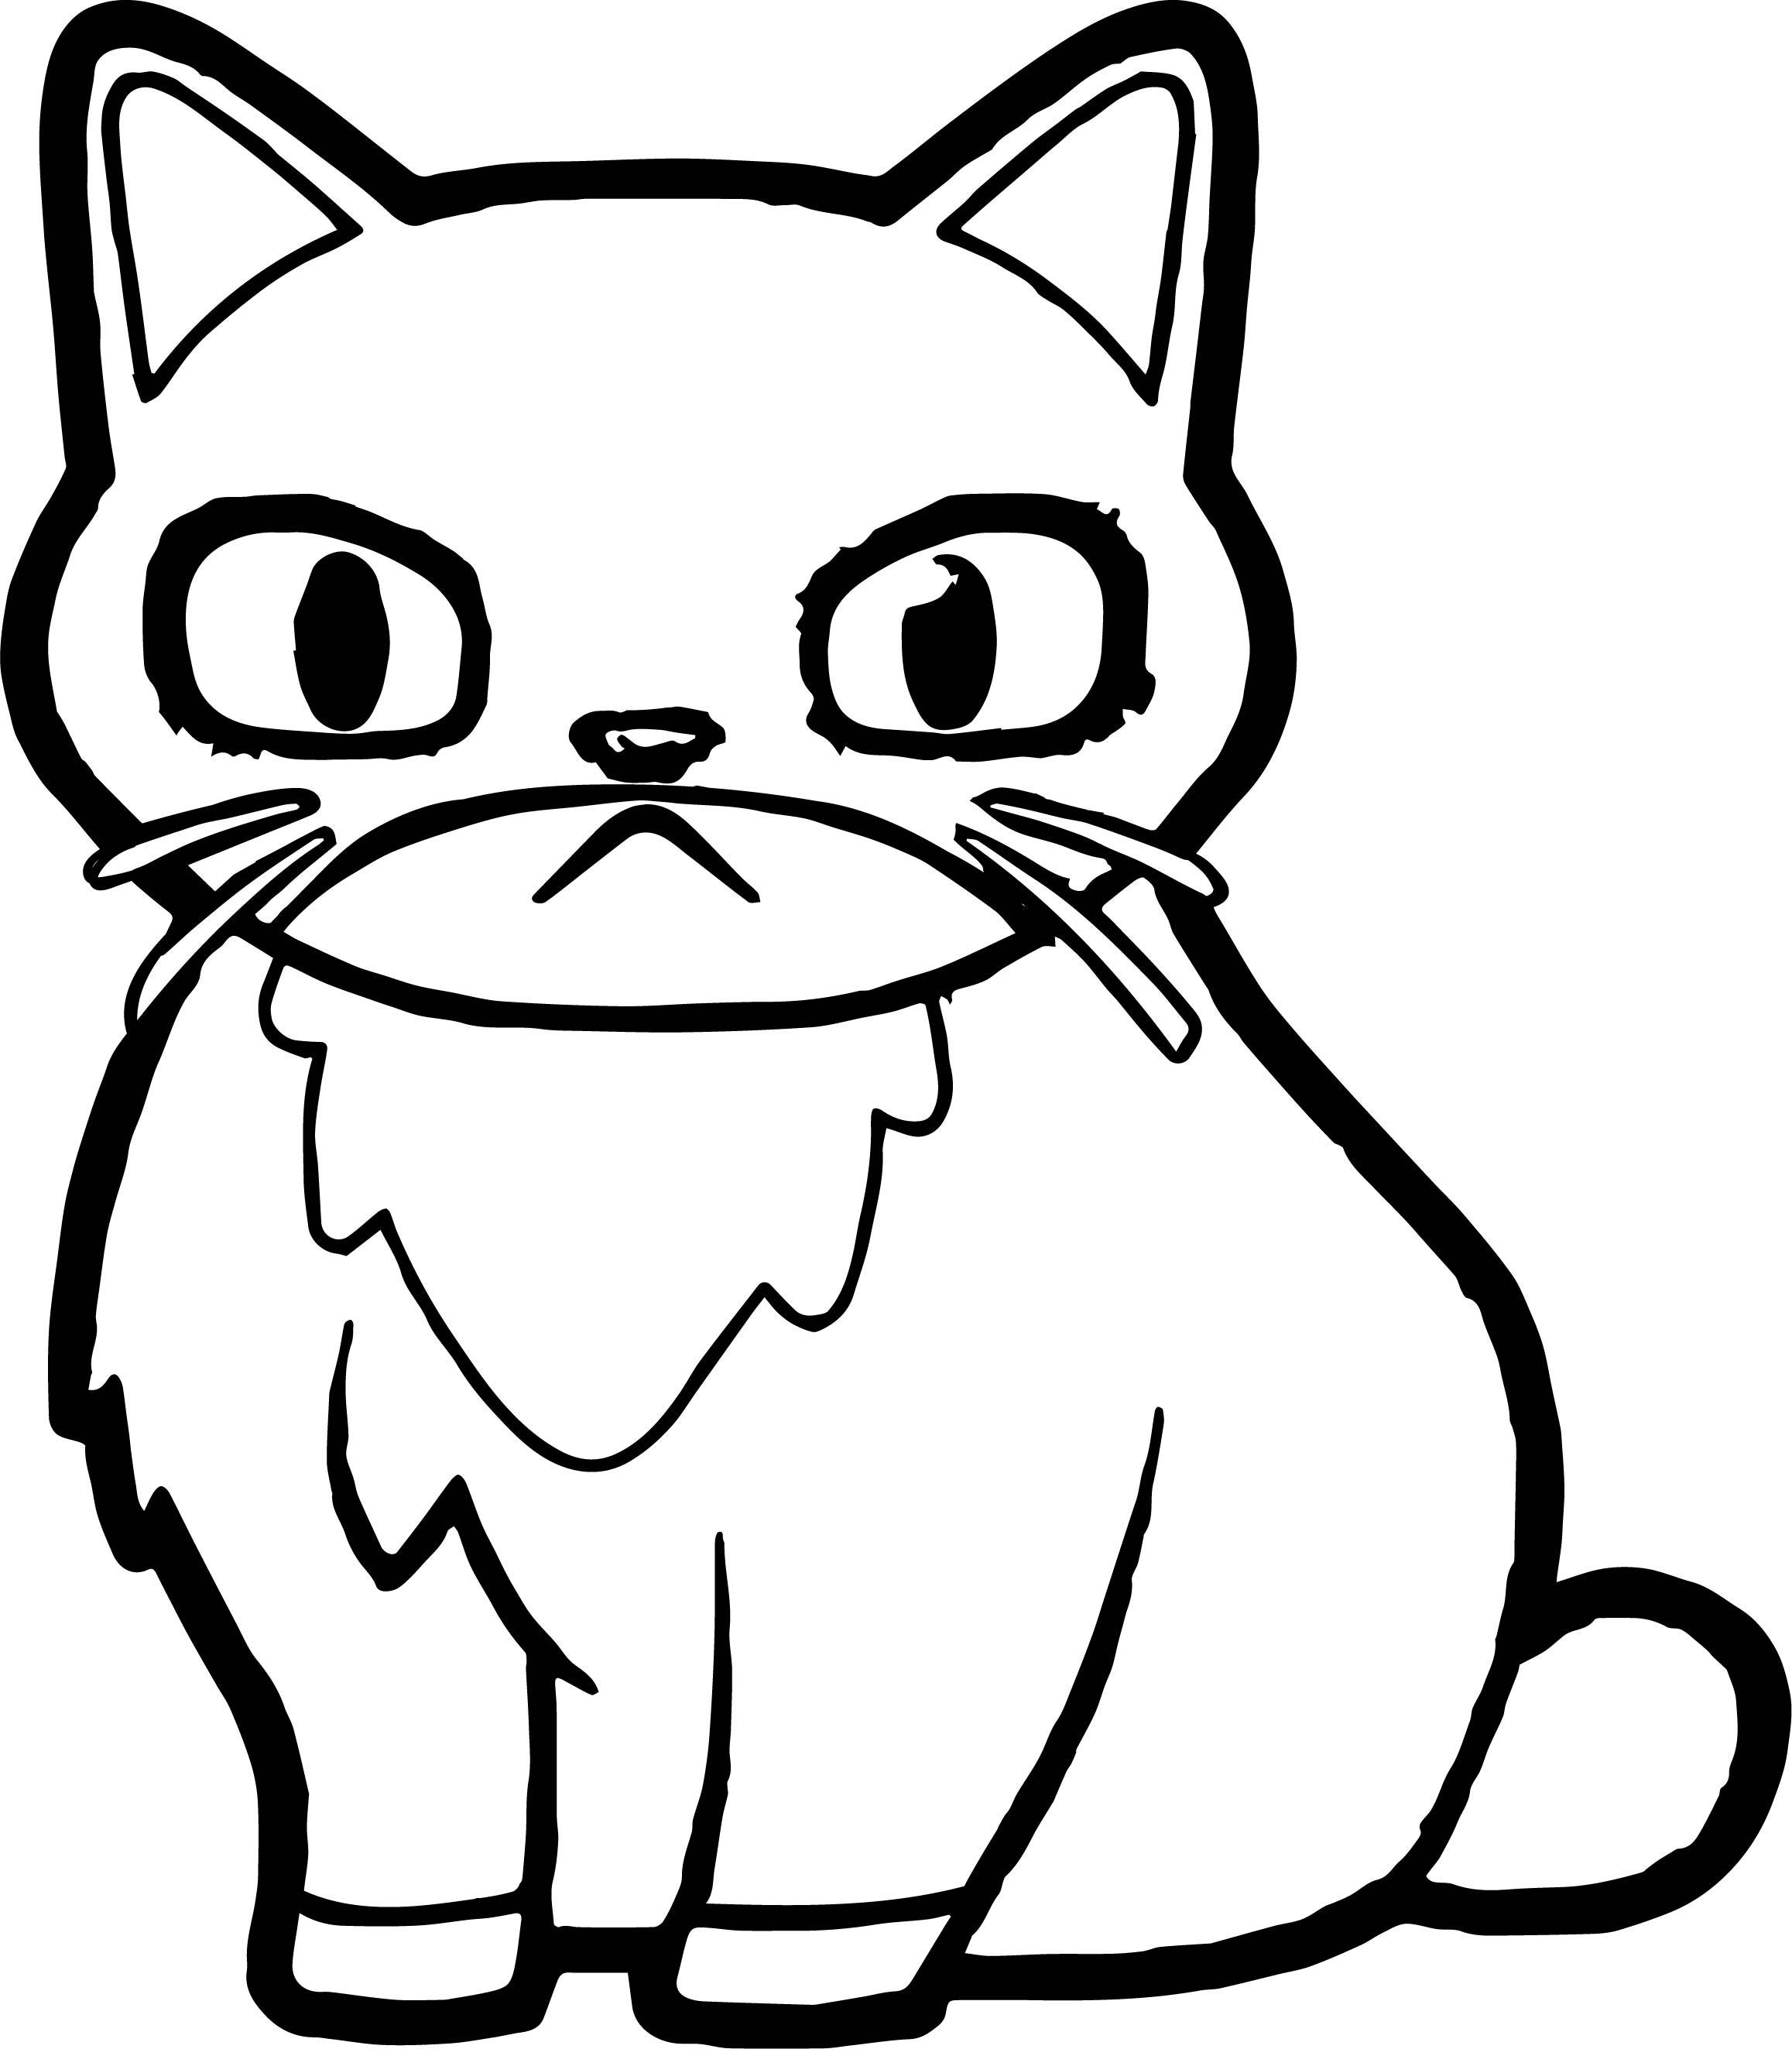  Grumpy Cat Coloring Pages with simple drawing